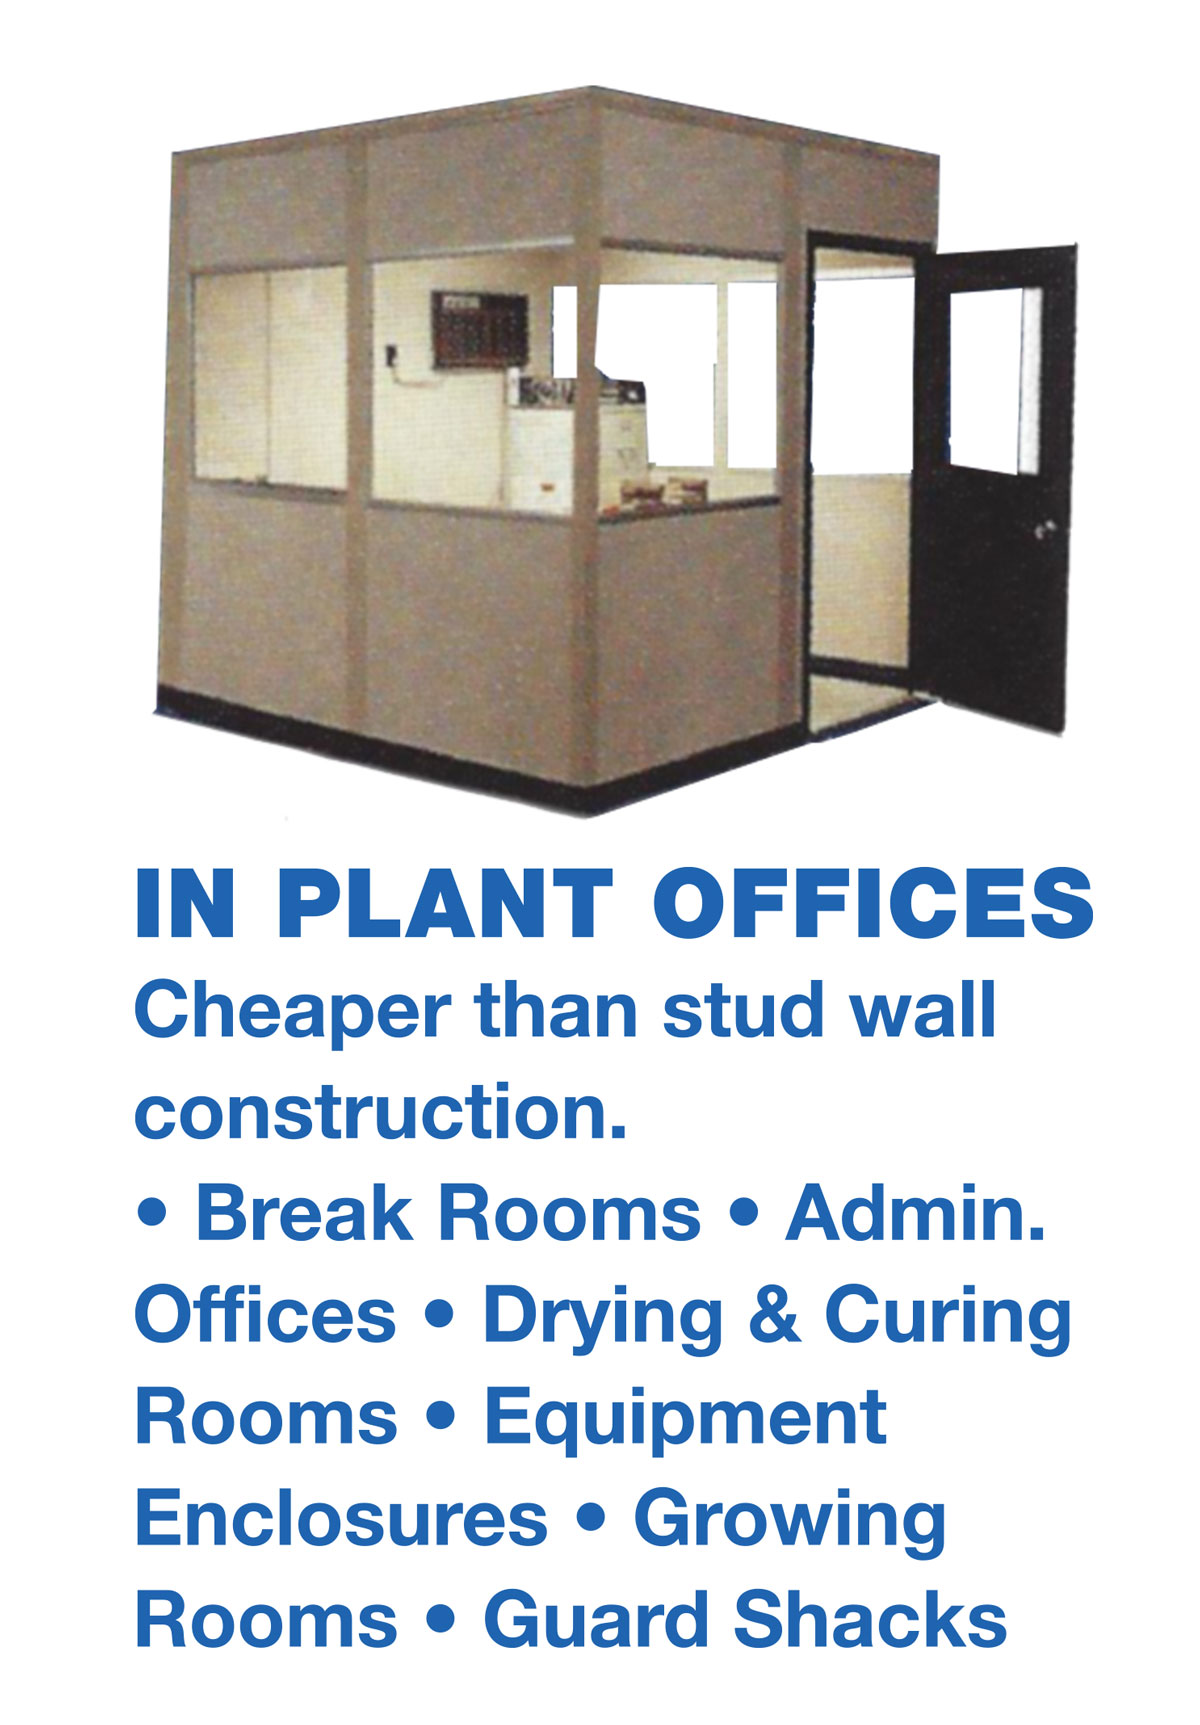 In Plant Offices